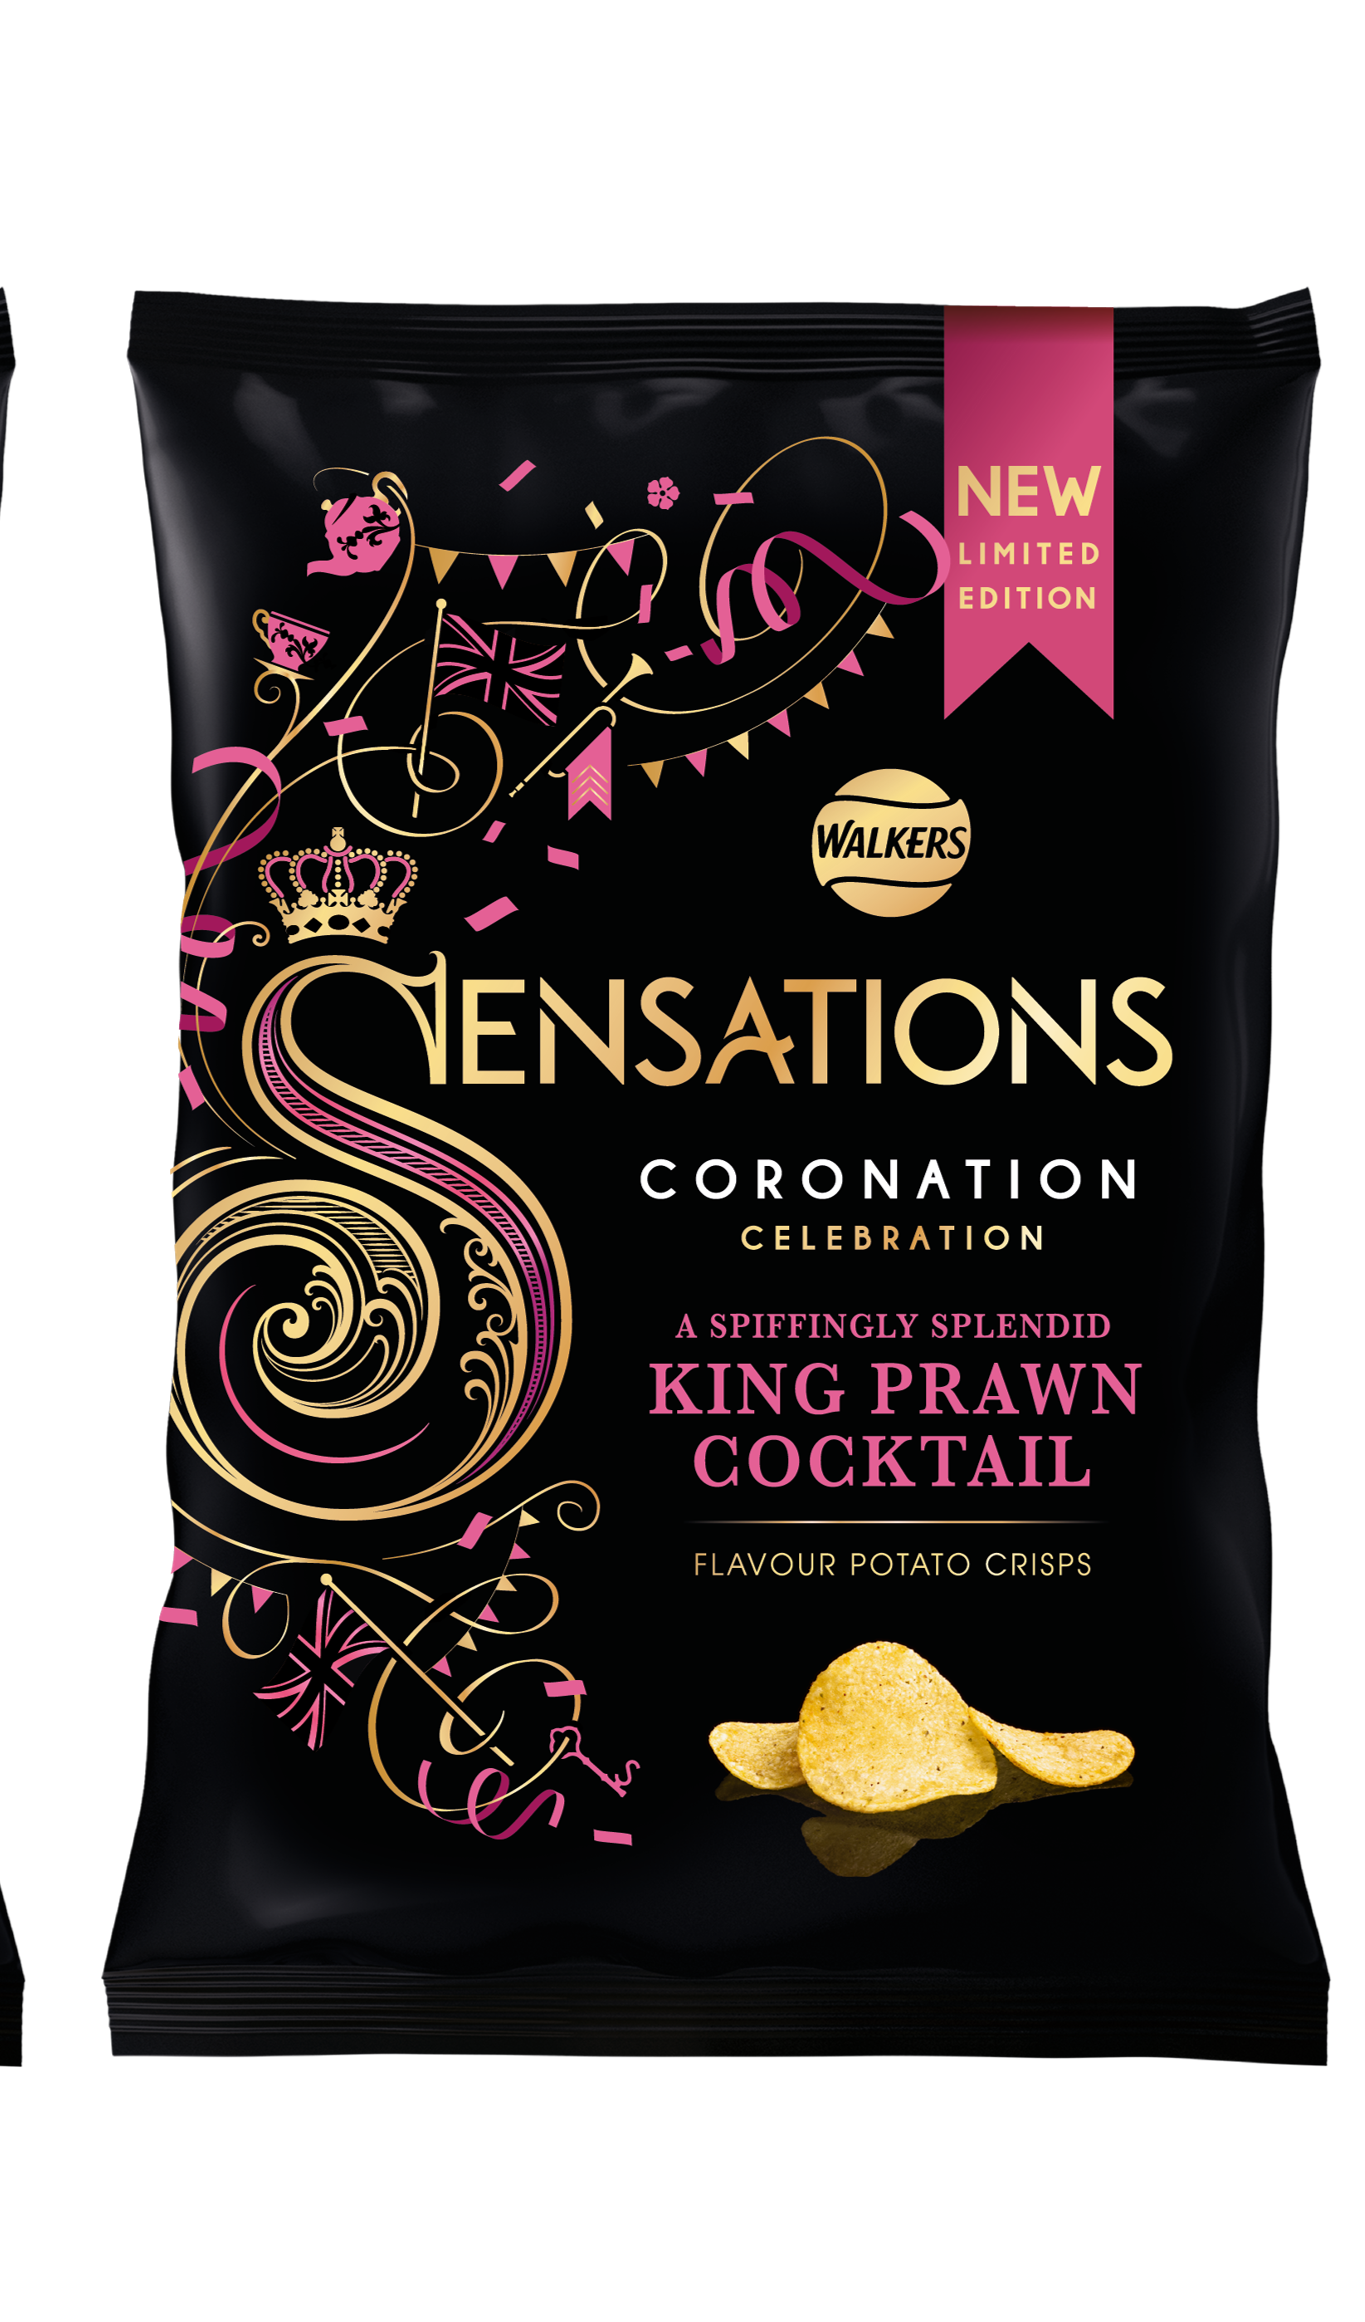 Sensations celebrates the Coronation with new limited-edition flavours